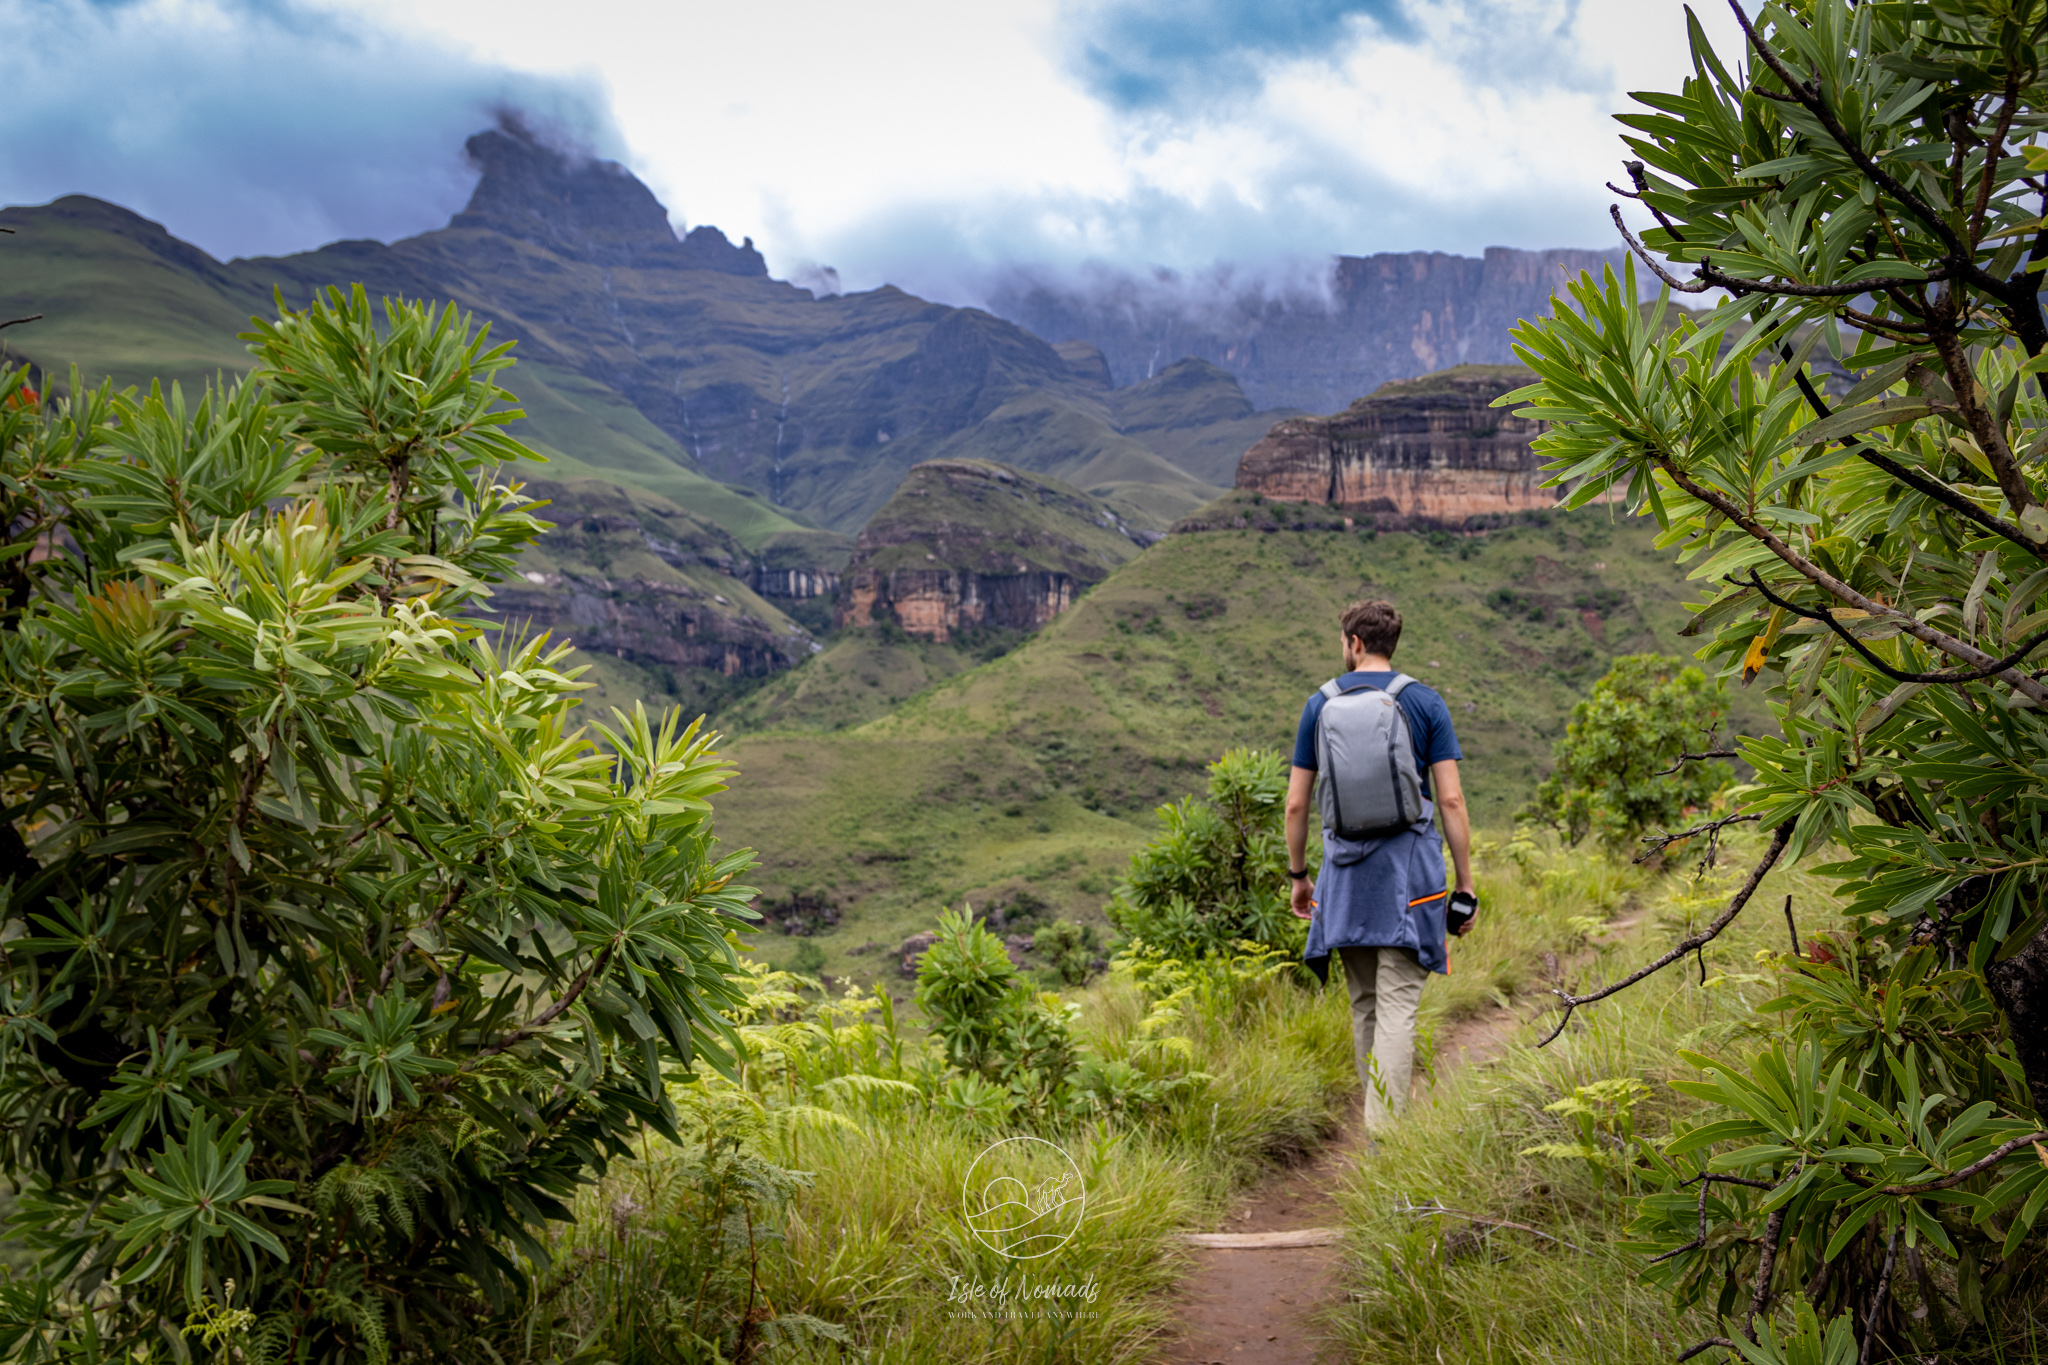 As you can see, days were quite cloudy with occasional rains when we visited Drakensberg in November. But you can still get some hikes in if you time them right.